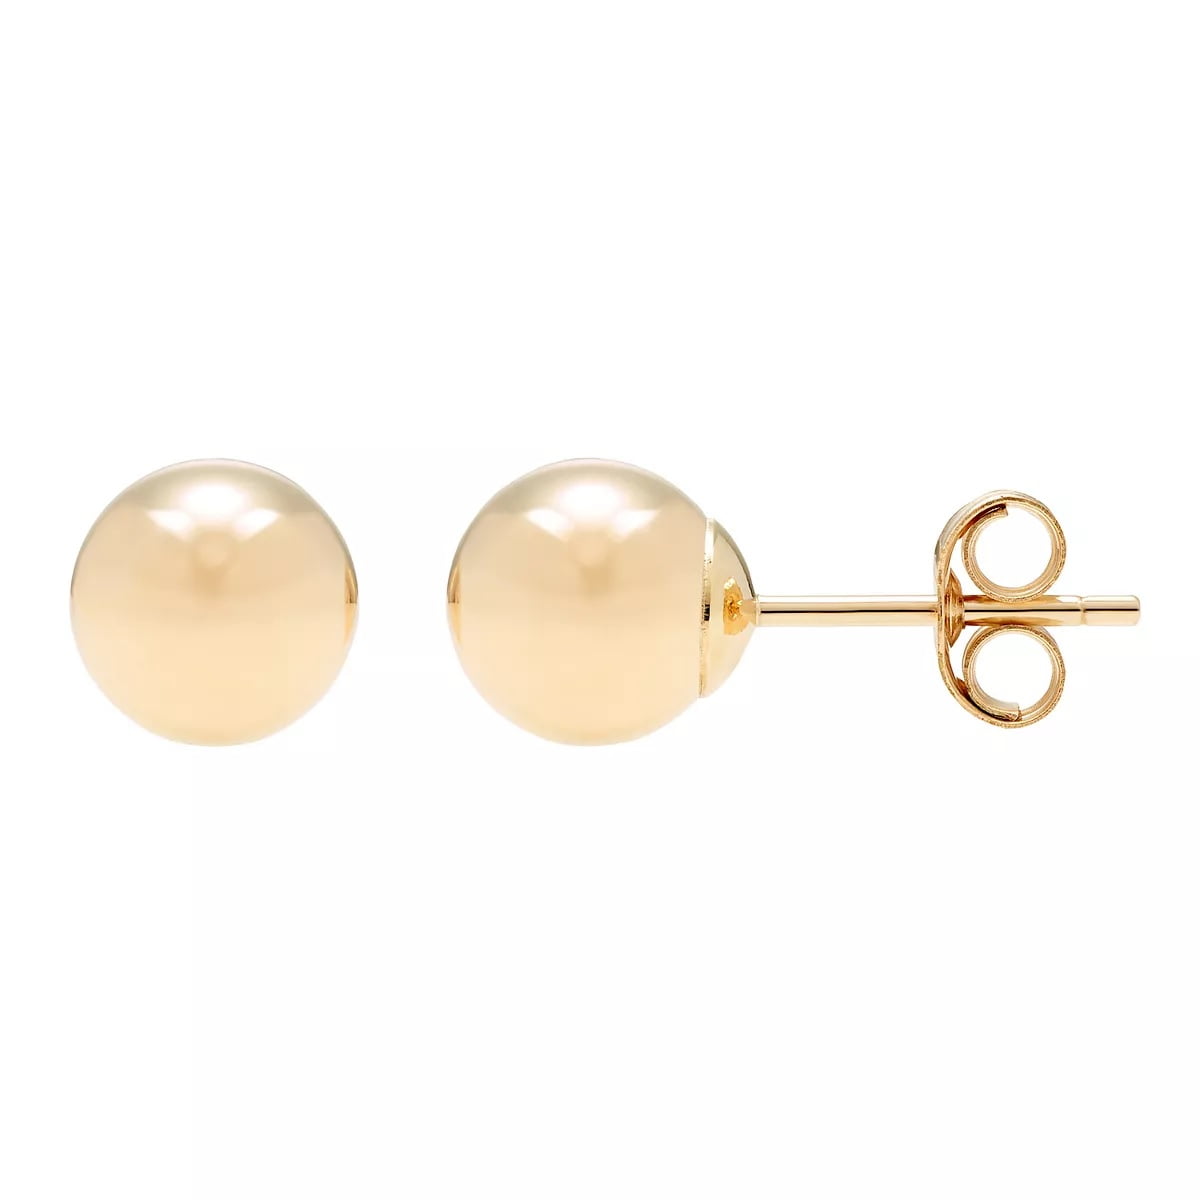 Vintage style Creole earrings in white pearls for women